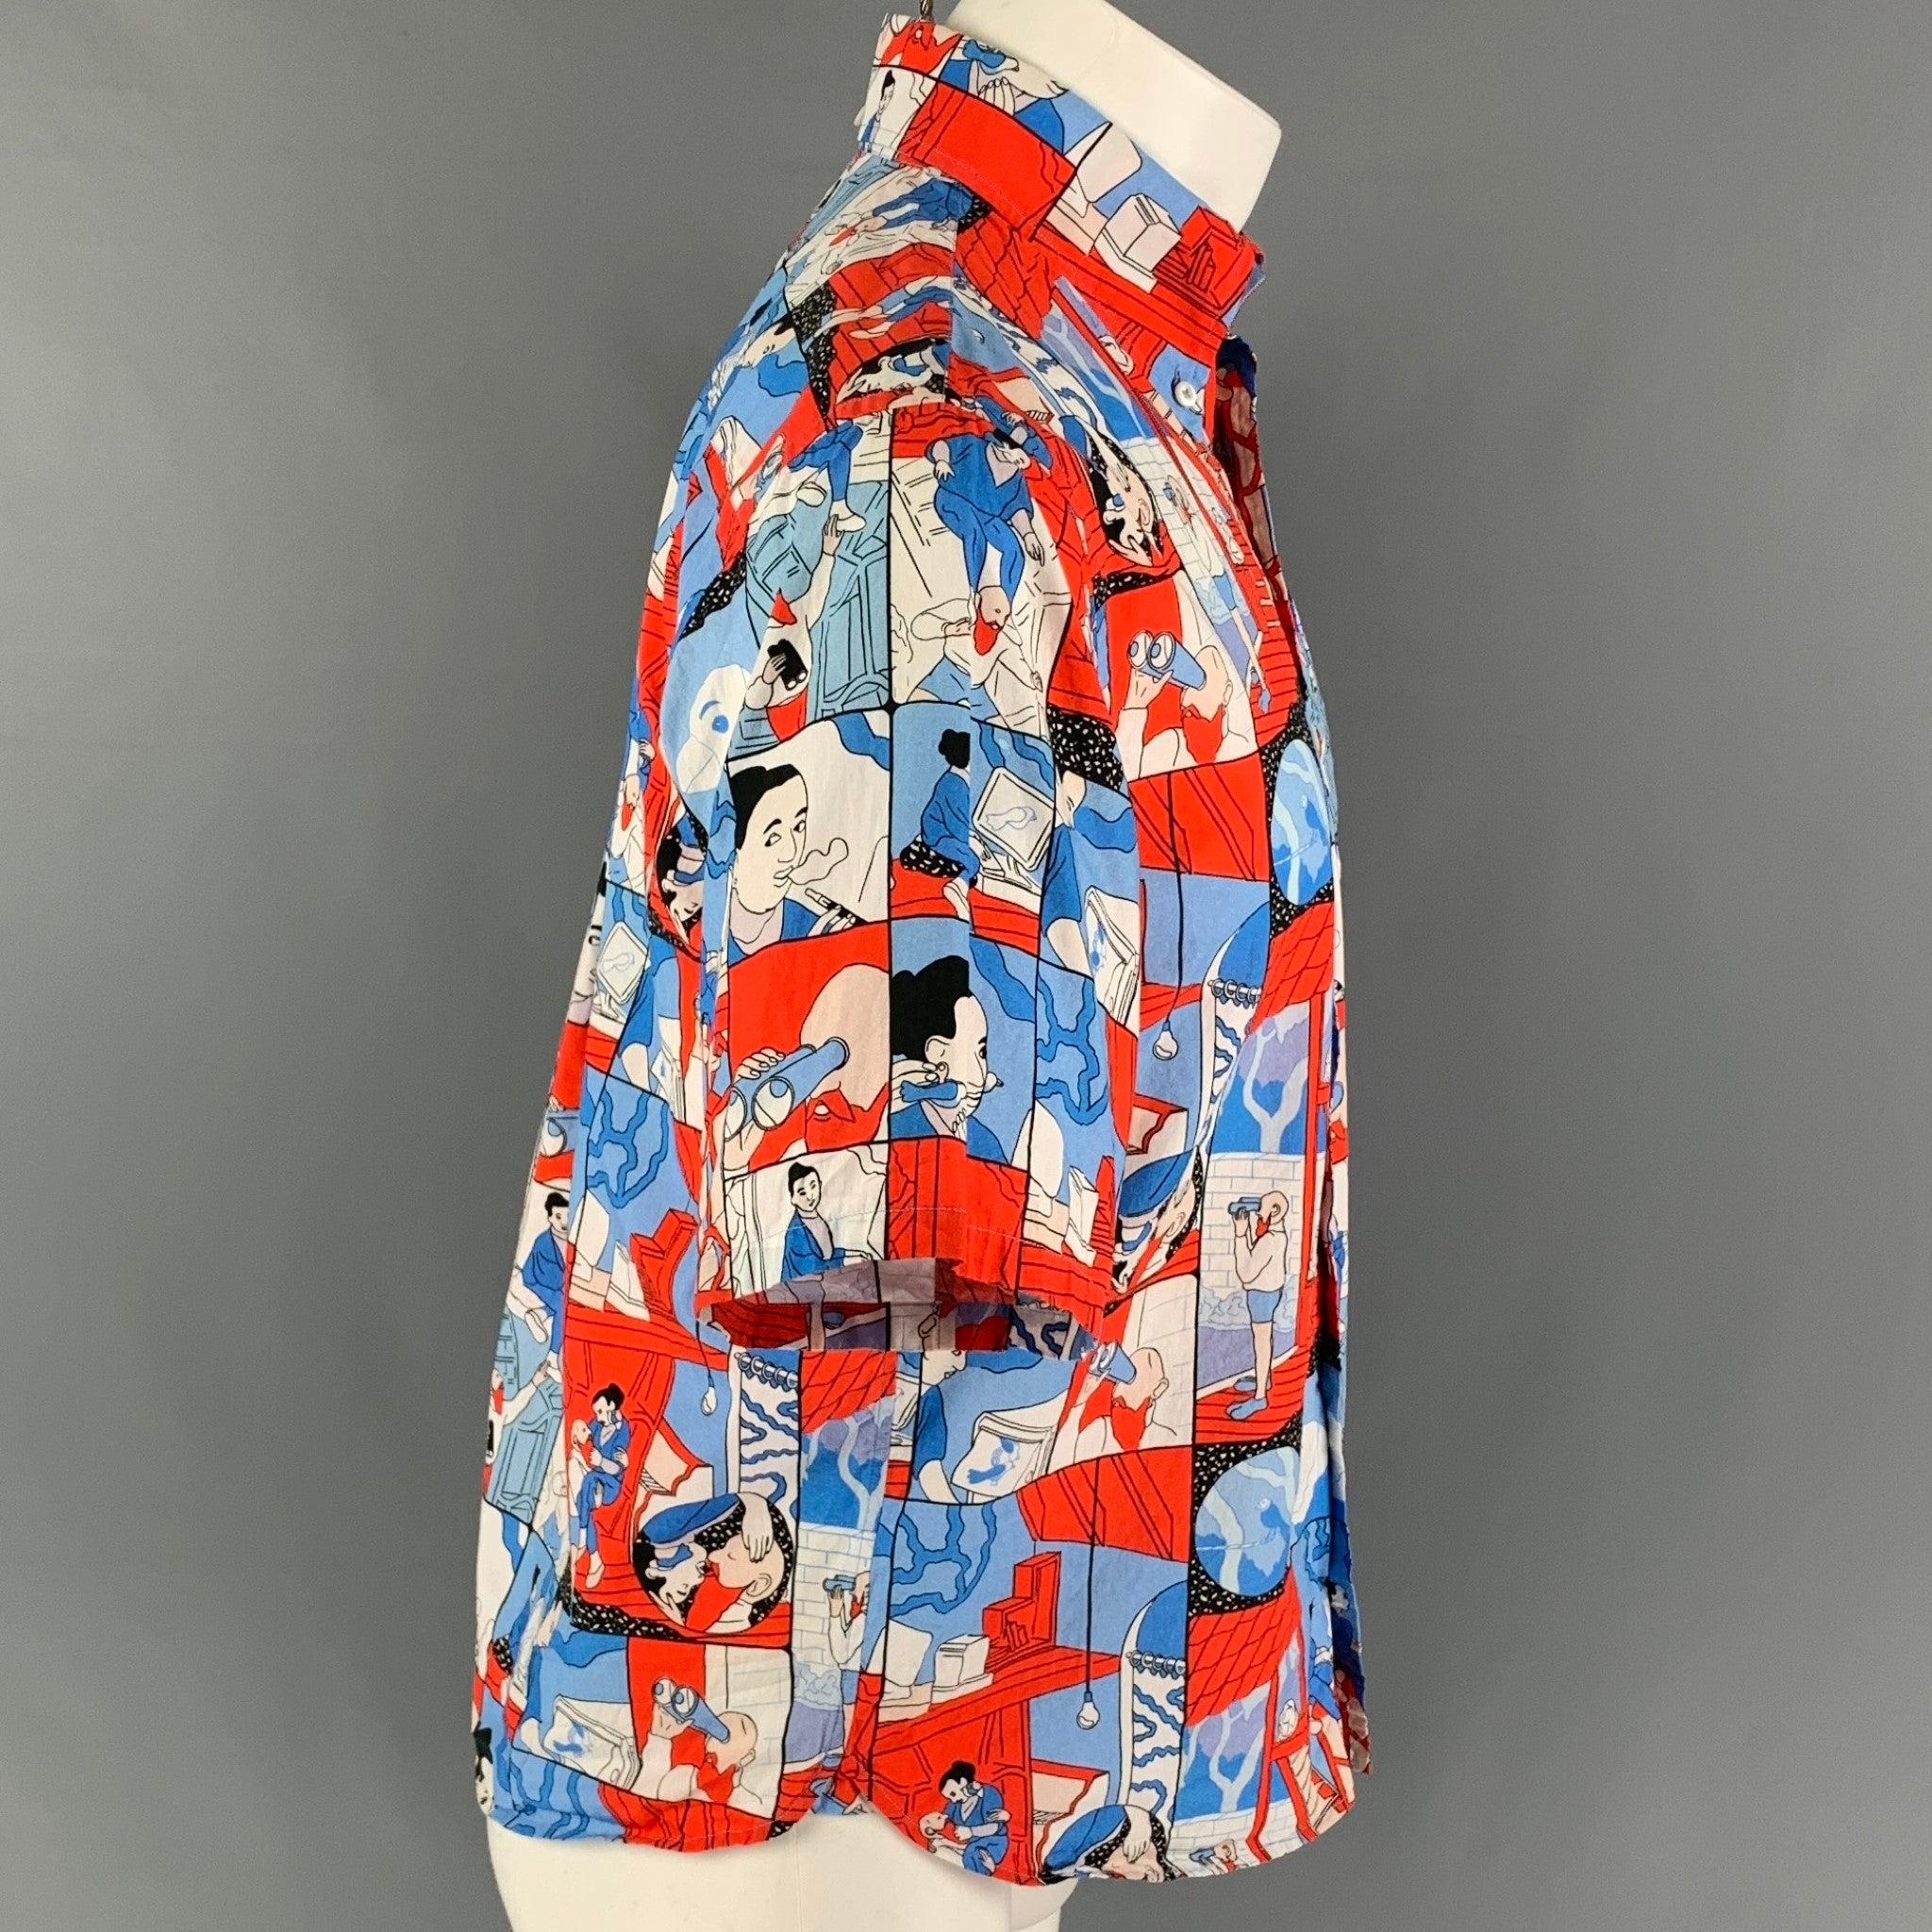 PRADA SS2018 'Comic Collection' short sleeve shirt comes in a red & blue graphic print cotton featuring a button down collar, patch pocket, and a button up closure. Made in Italy.
Very Good
Pre-Owned Condition. 

Marked:   S 

Measurements: 
